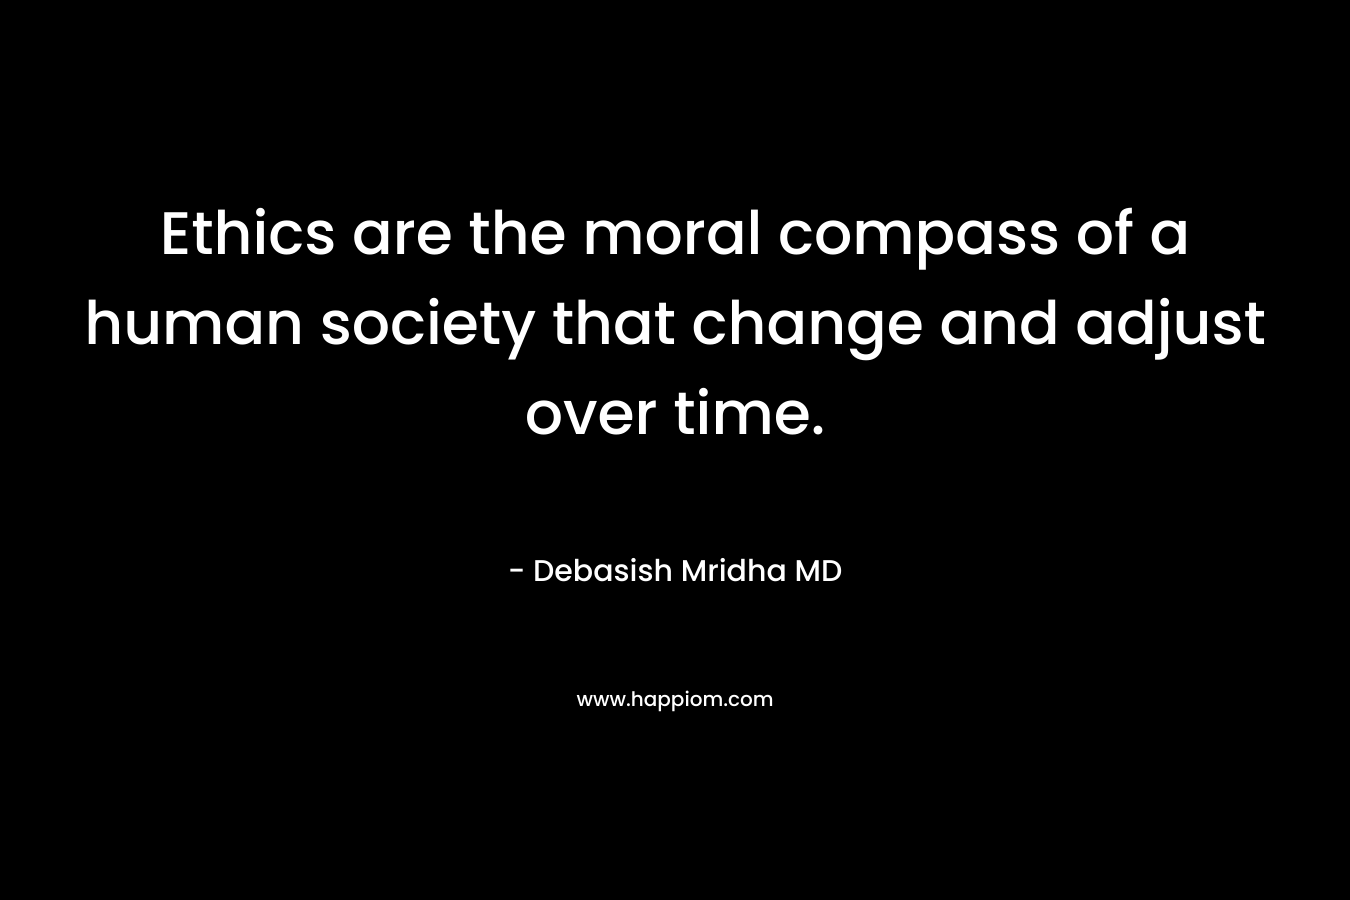 Ethics are the moral compass of a human society that change and adjust over time.